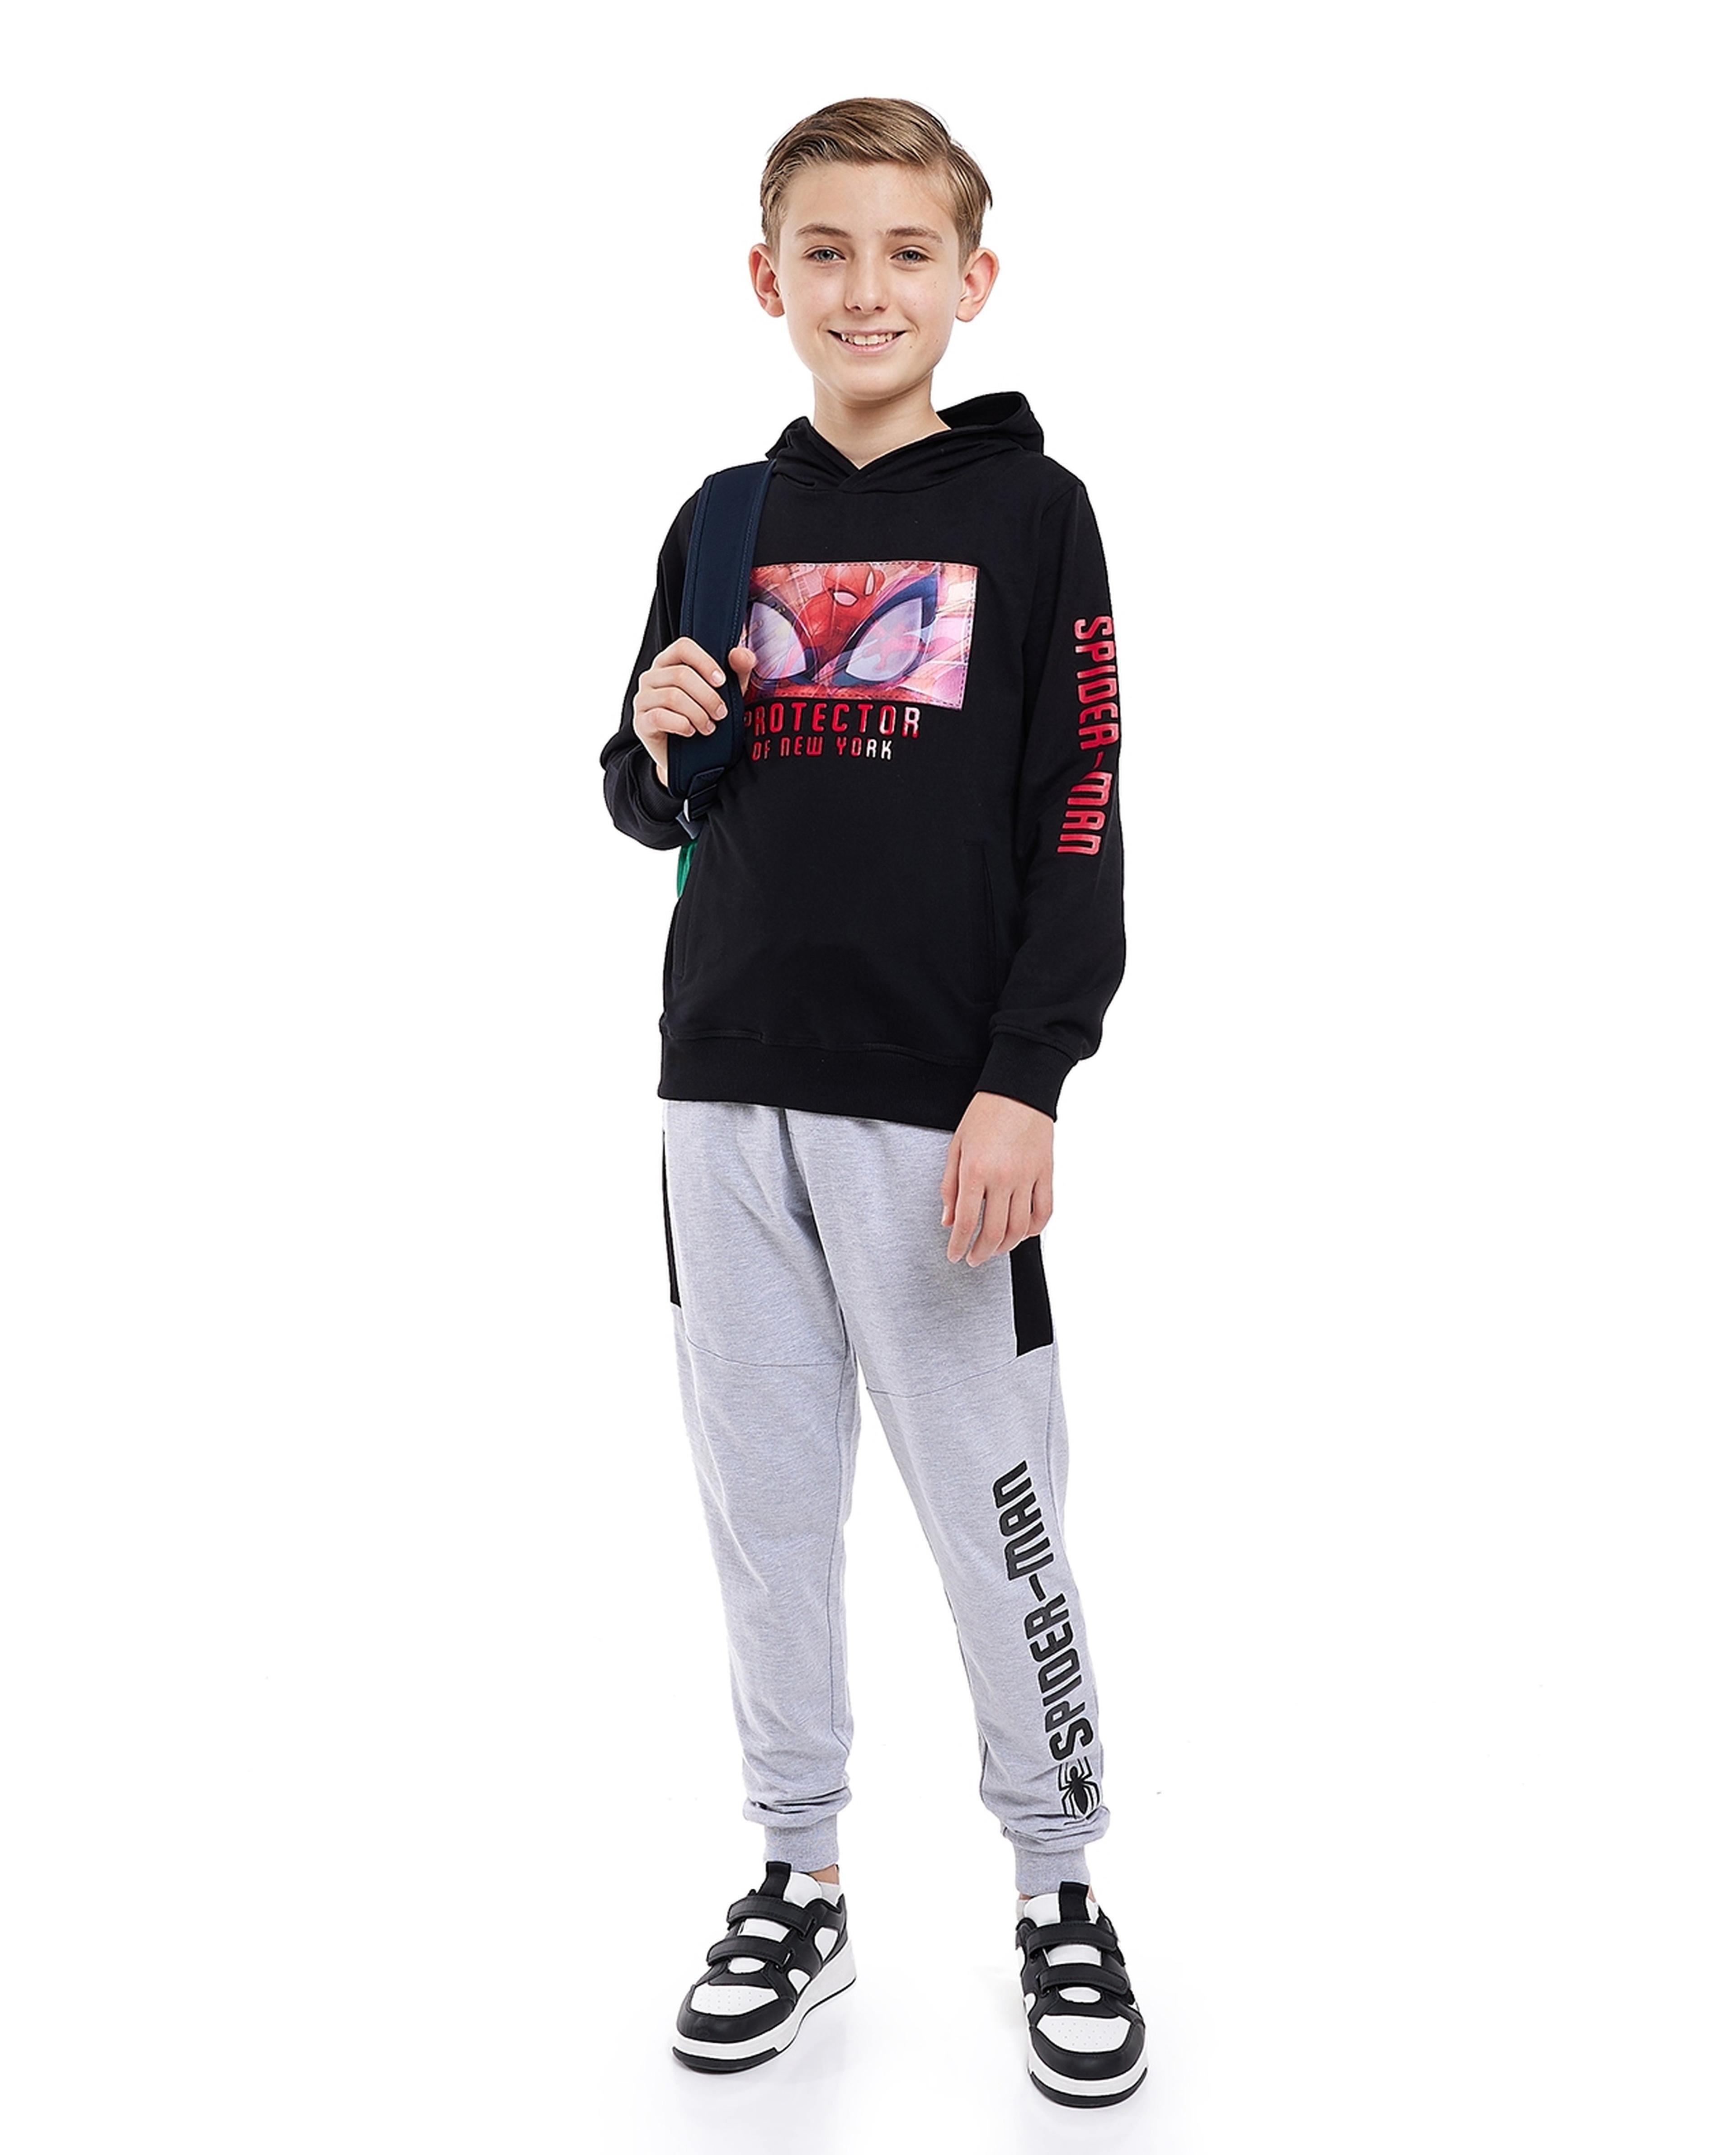 Spider-Man Sweatshirt with Crew Neck and Long Sleeves